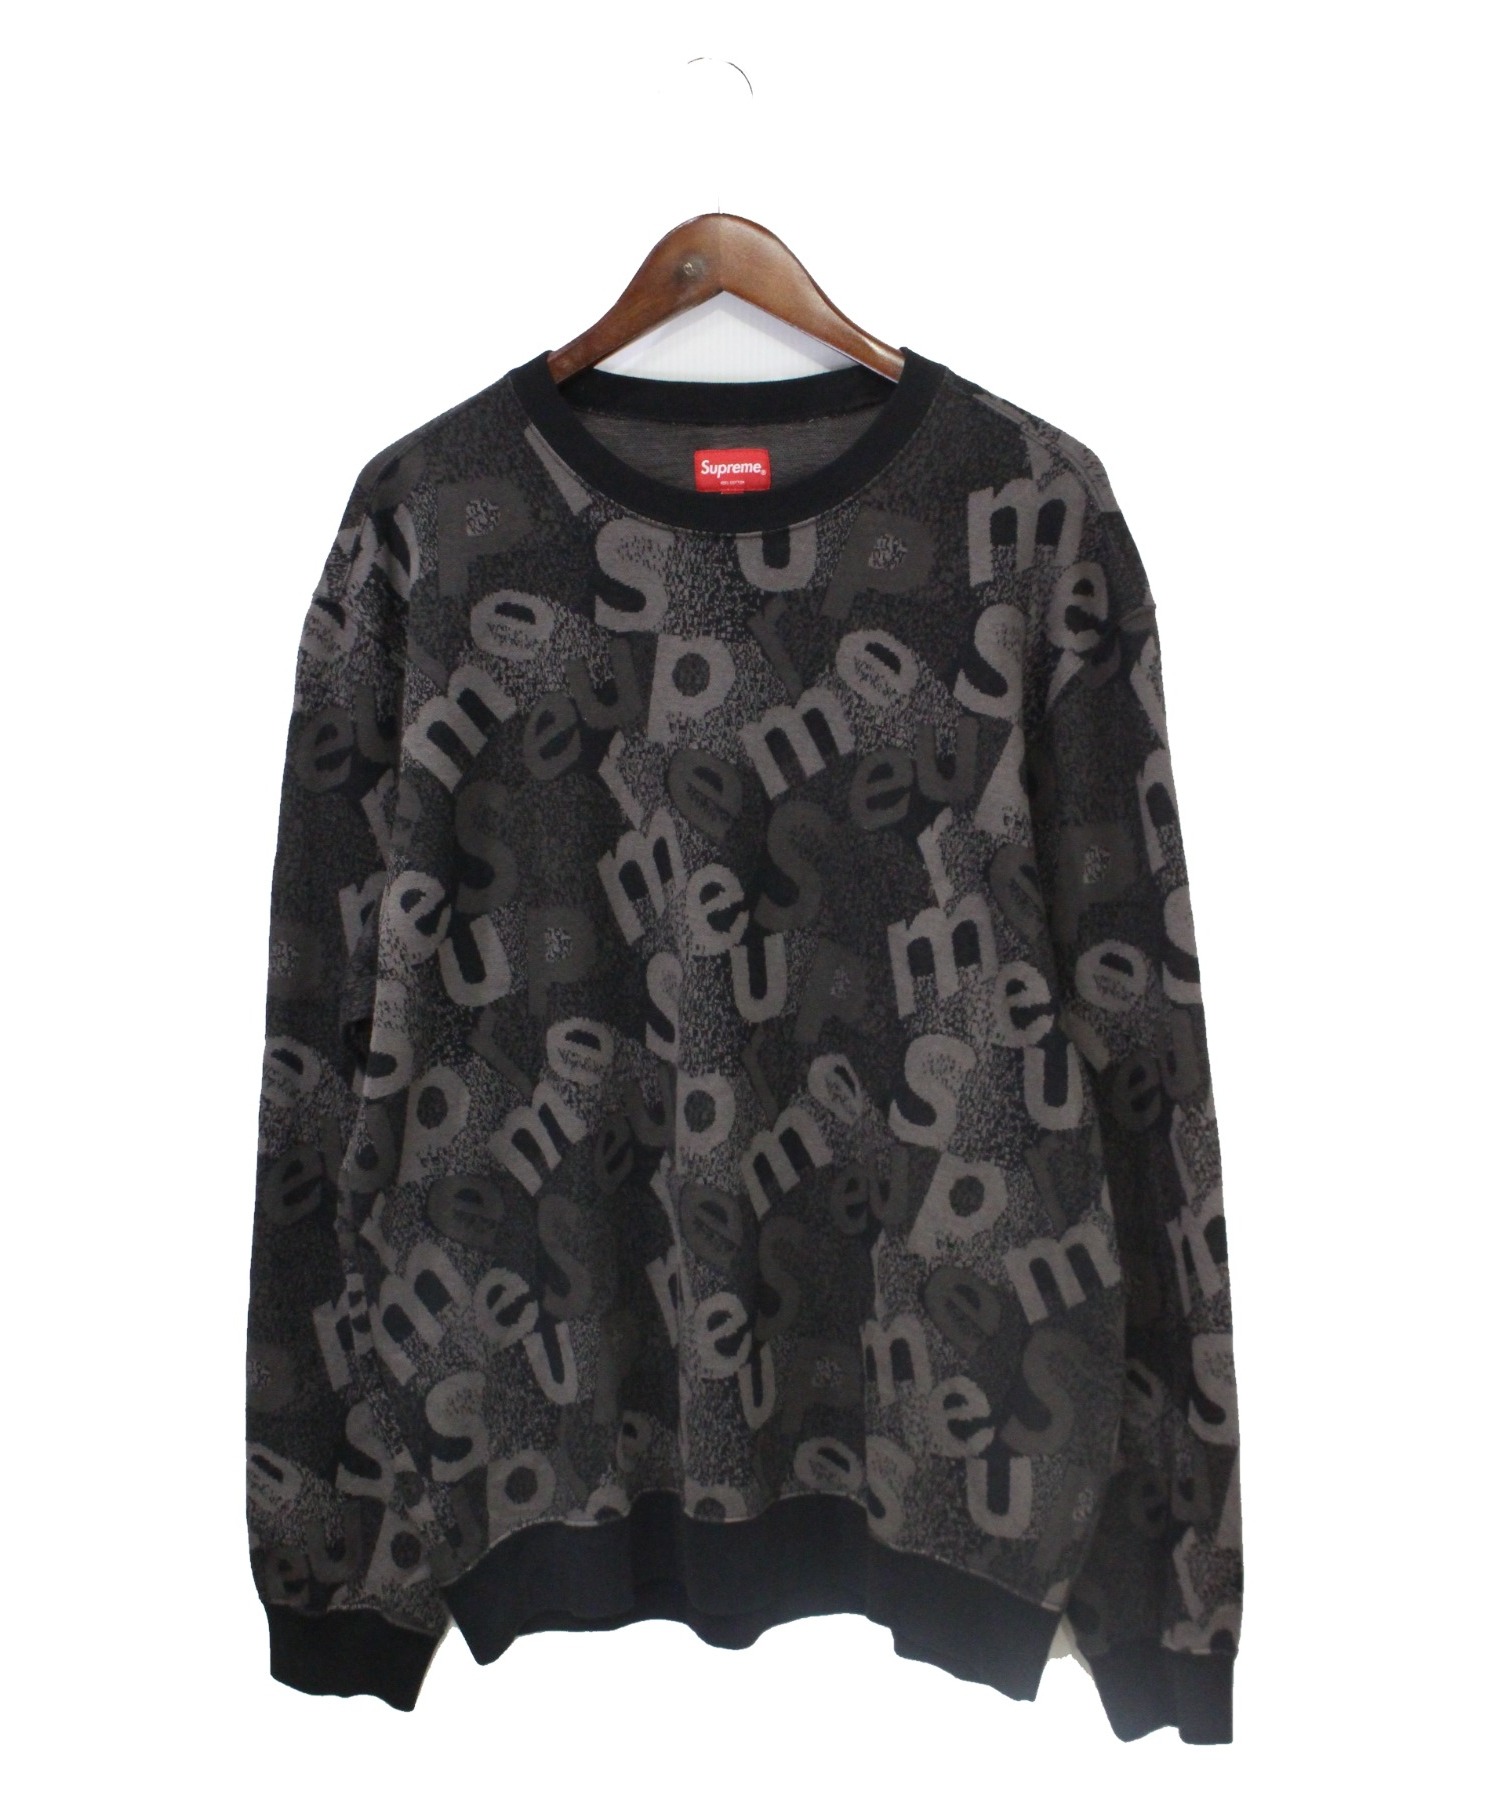 supreme 19aw scatter text crewneck Msize